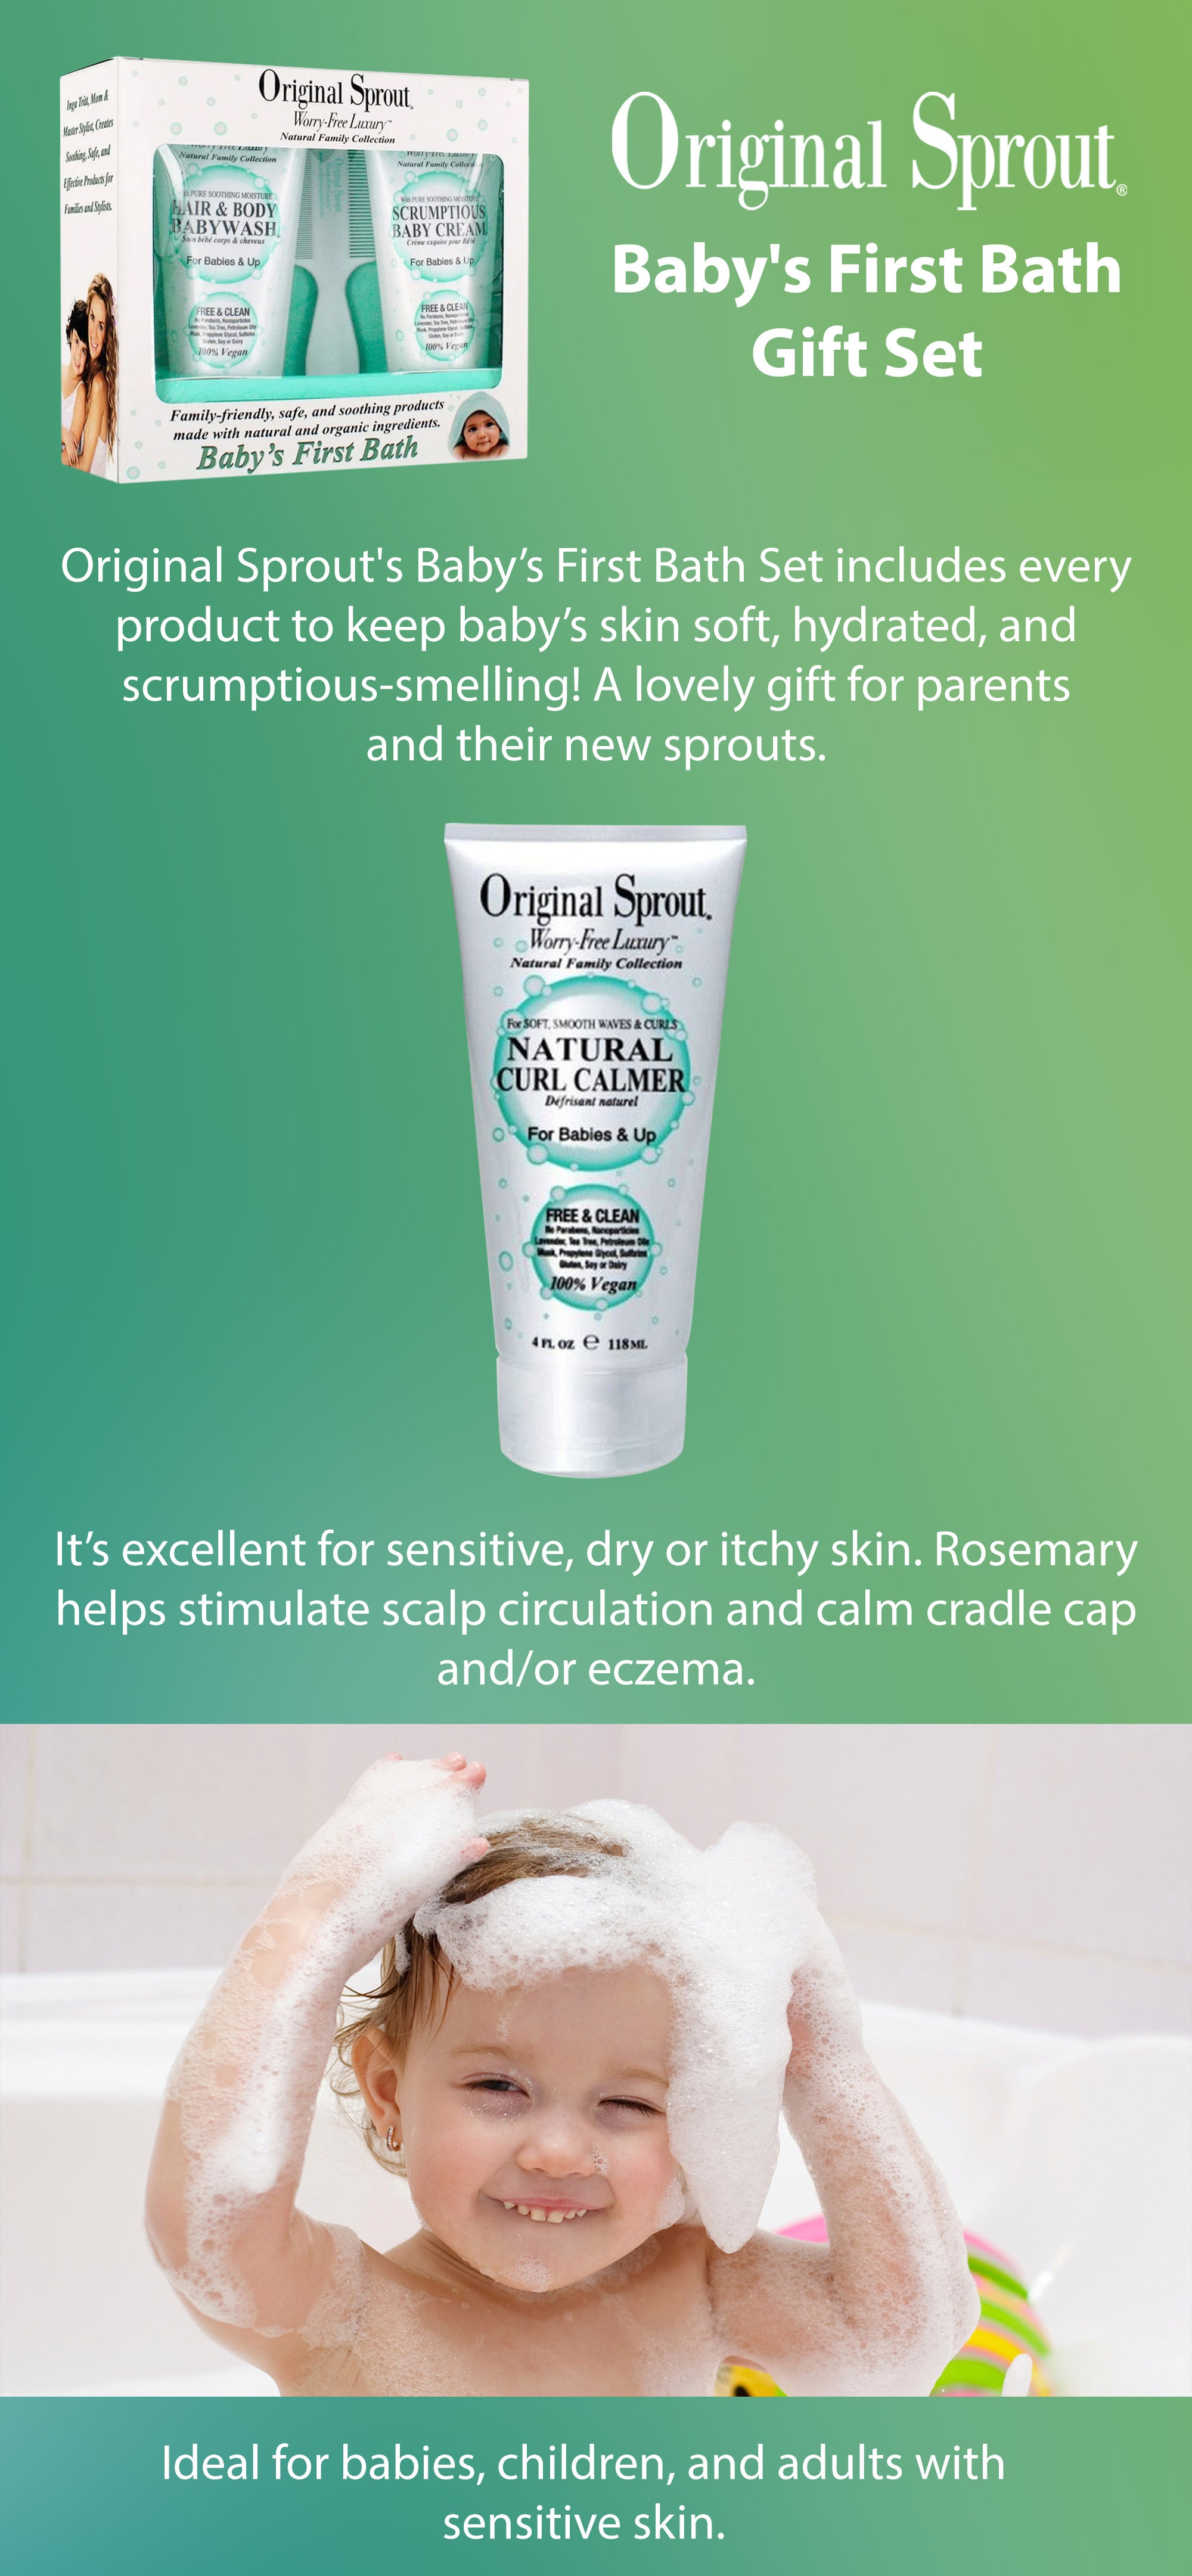 Original Sprout Babys First Bath Kit: 1x Hair and Body Baby Wash 118ml + 1x  Scrumptious Baby Cream 118ml + 1x Comb (For 